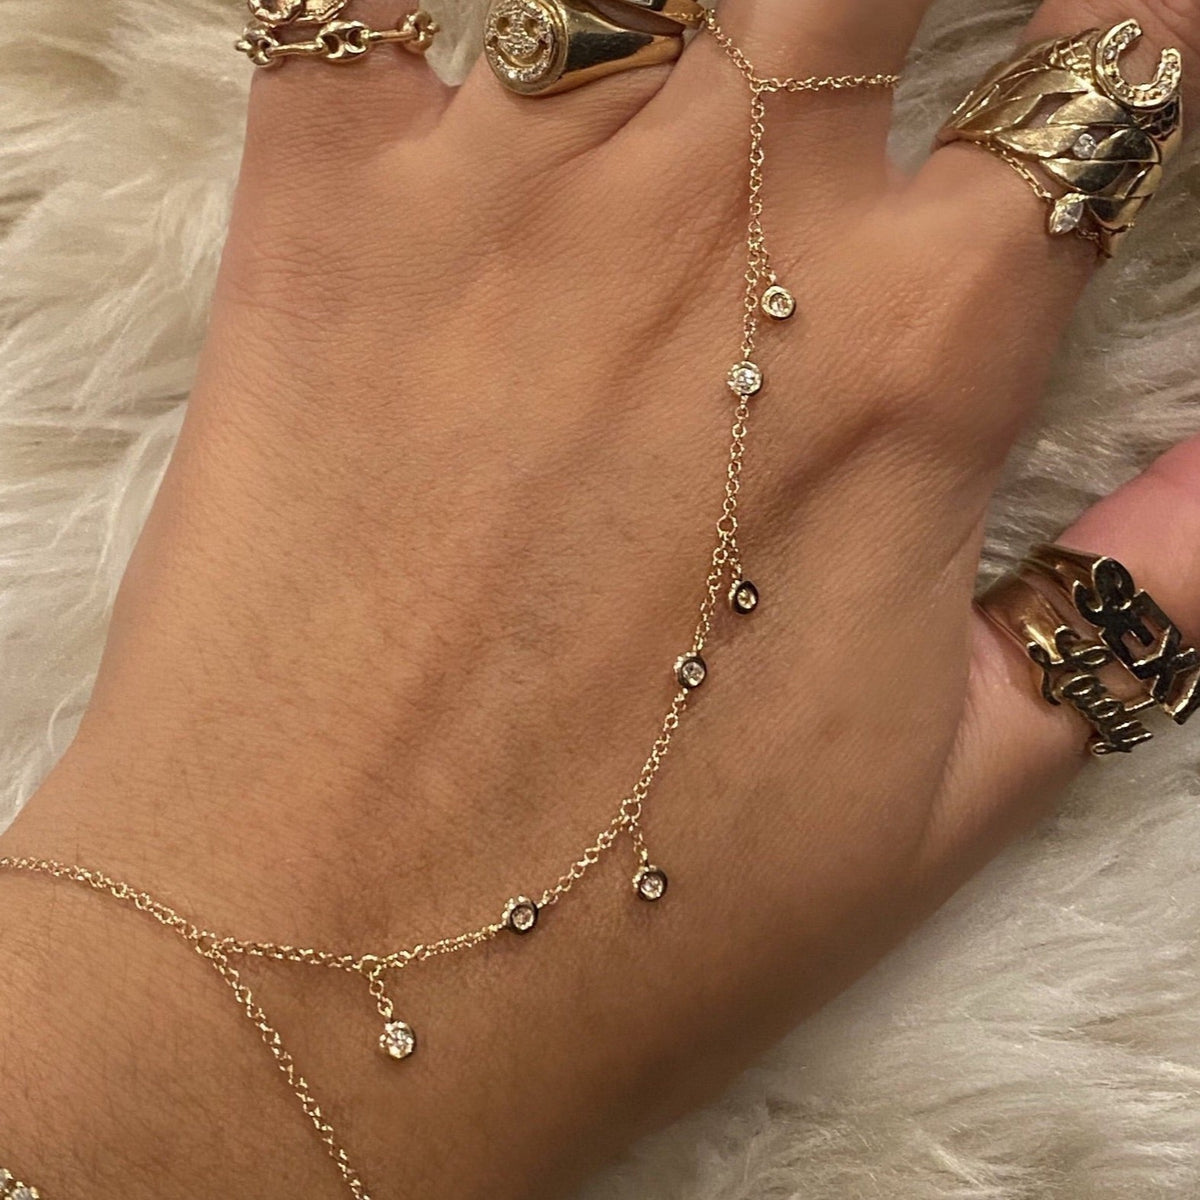  Obmyec Rhinestone Hand Harness Sparkle Crystal Hand Jewelry  Silver Shiny Finger Ring Bracelets Full Hand Link Bracelets Hand Chain Hand  Accessories for Women and Girls (Silver-1): Clothing, Shoes & Jewelry